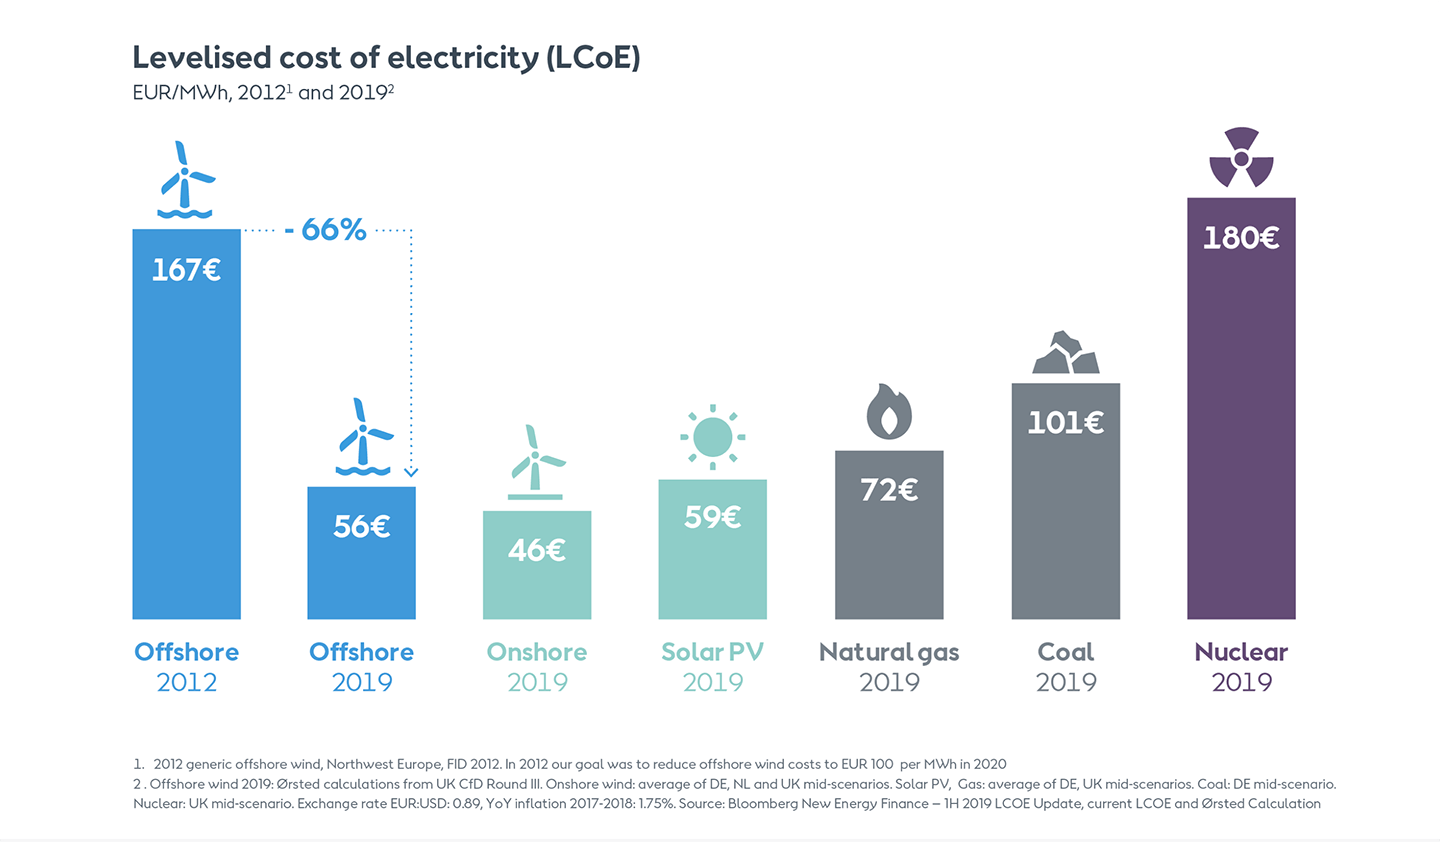 Levelised Cost of Electricity